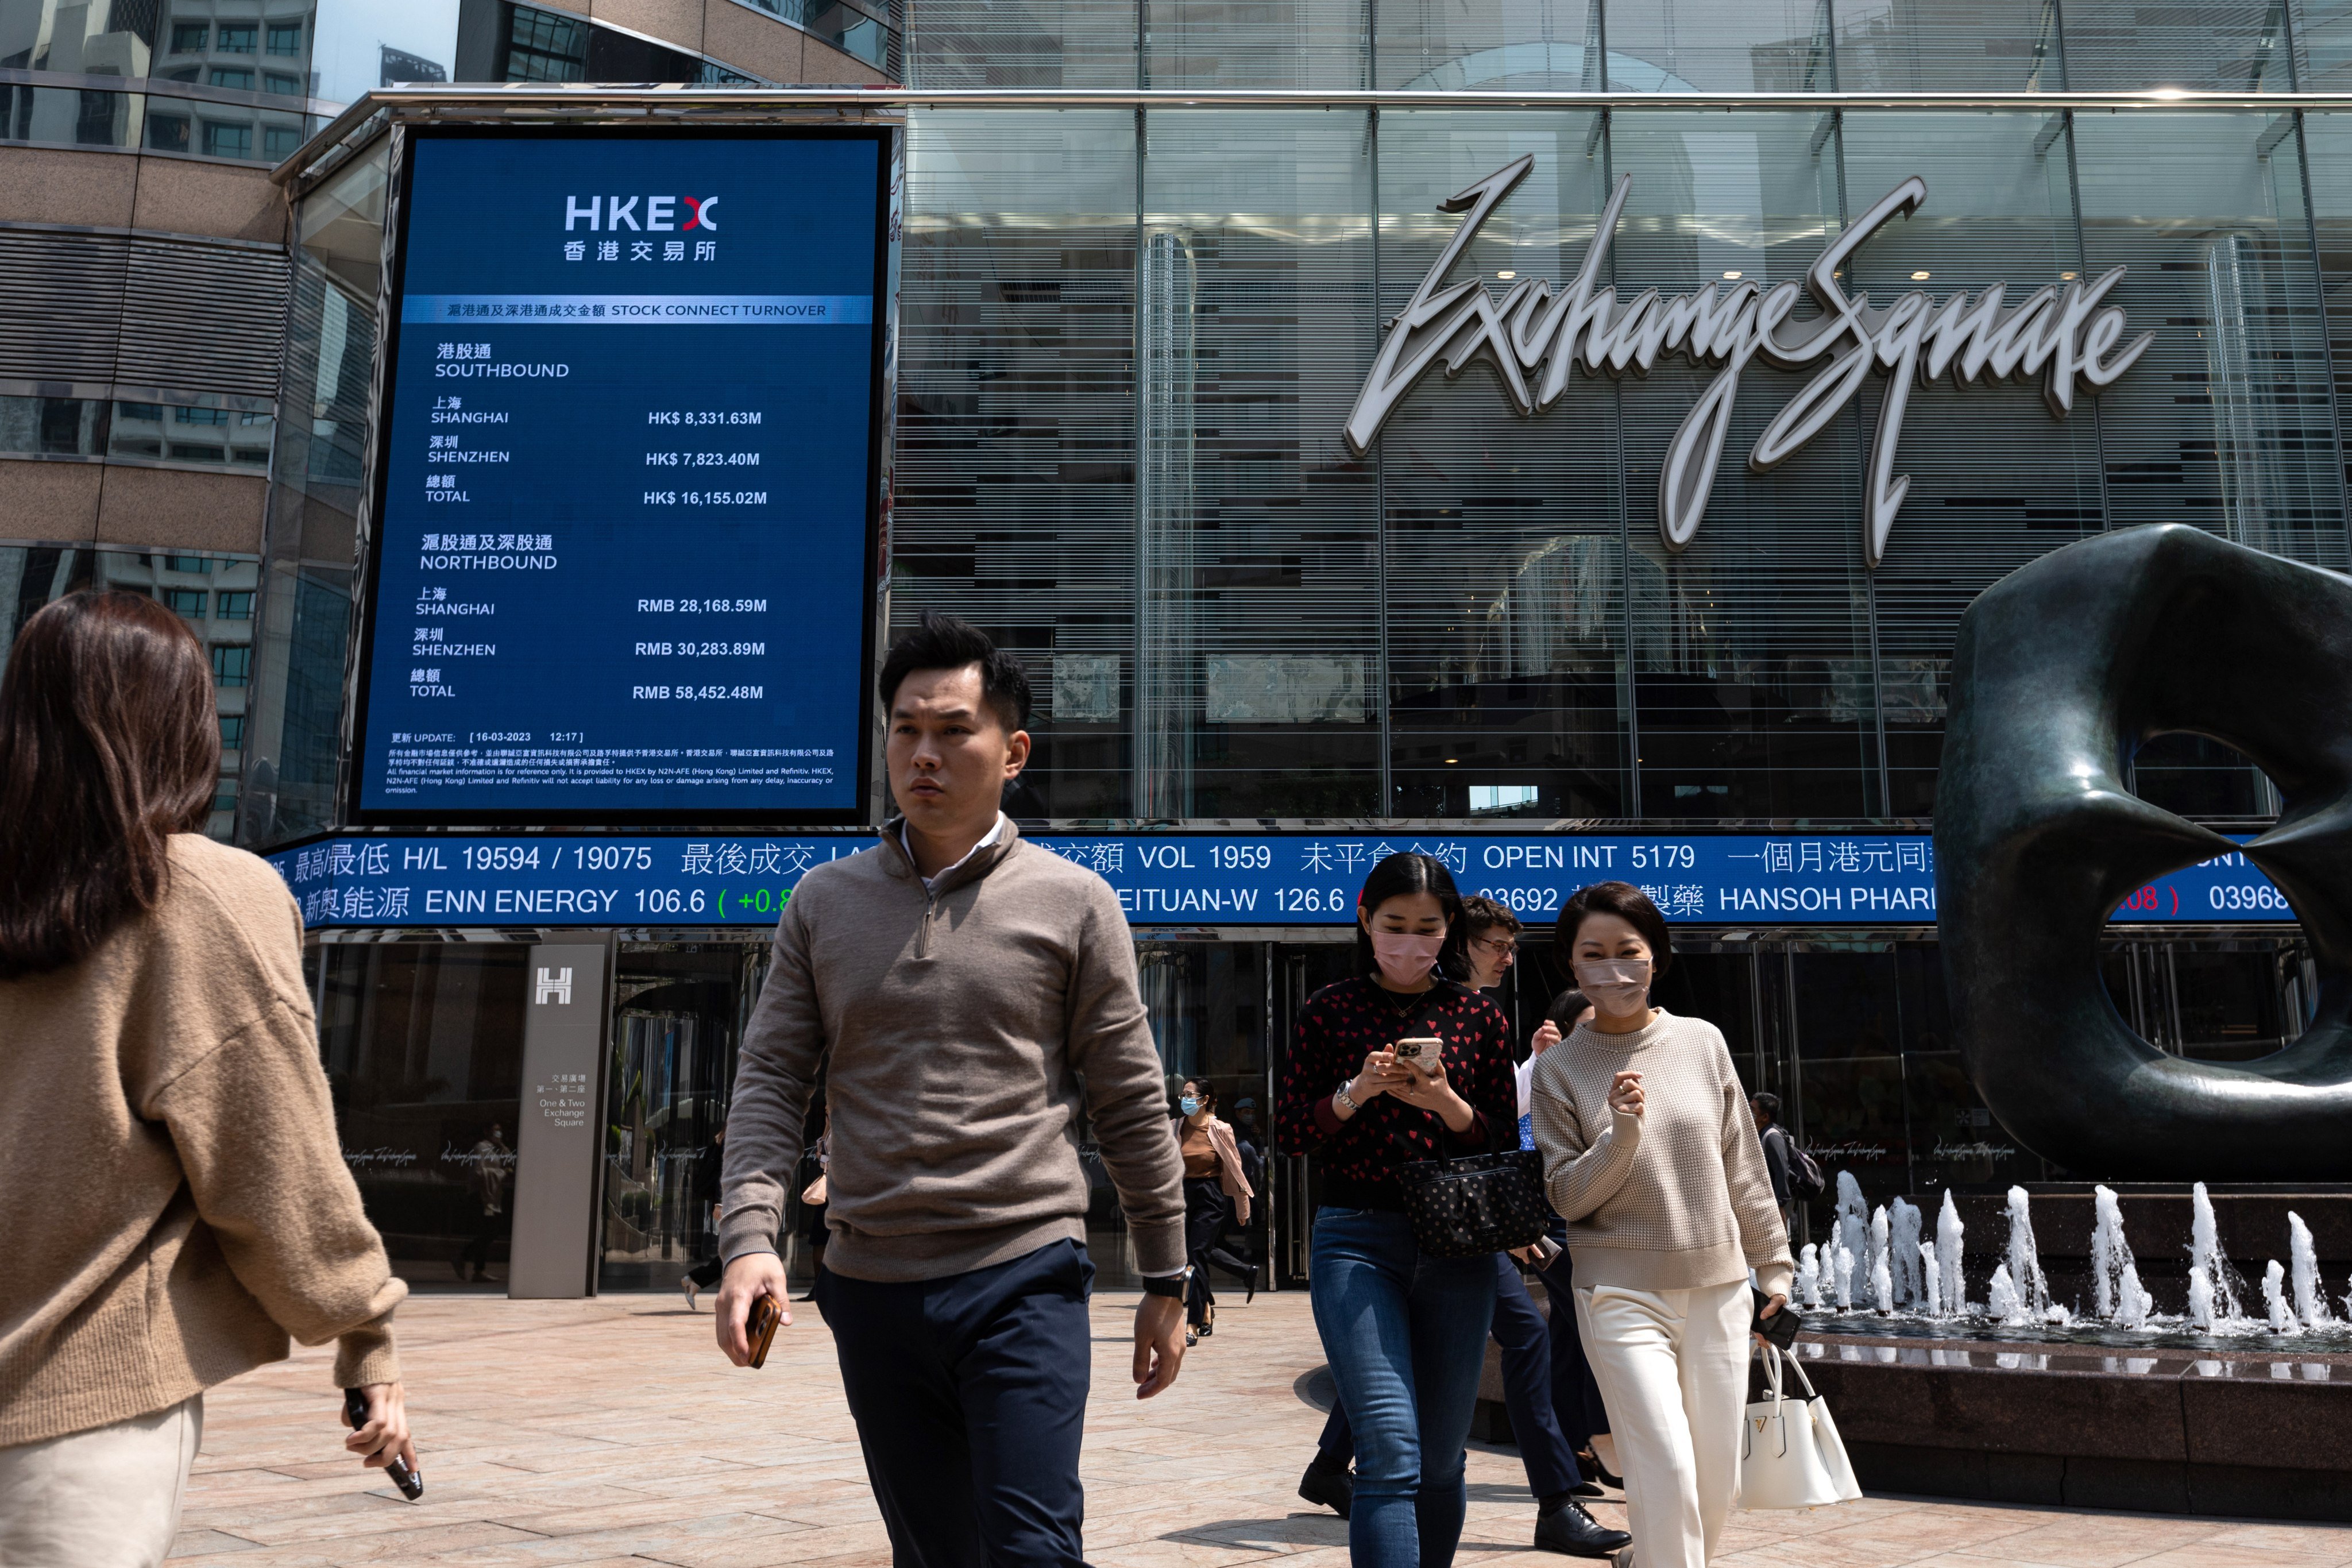 Pedestrians walk past a stock ticker outside Exchange Square. Hong Kong’s stock market is Asia’s third largest after China and Japan. Photo: EPA-EFE